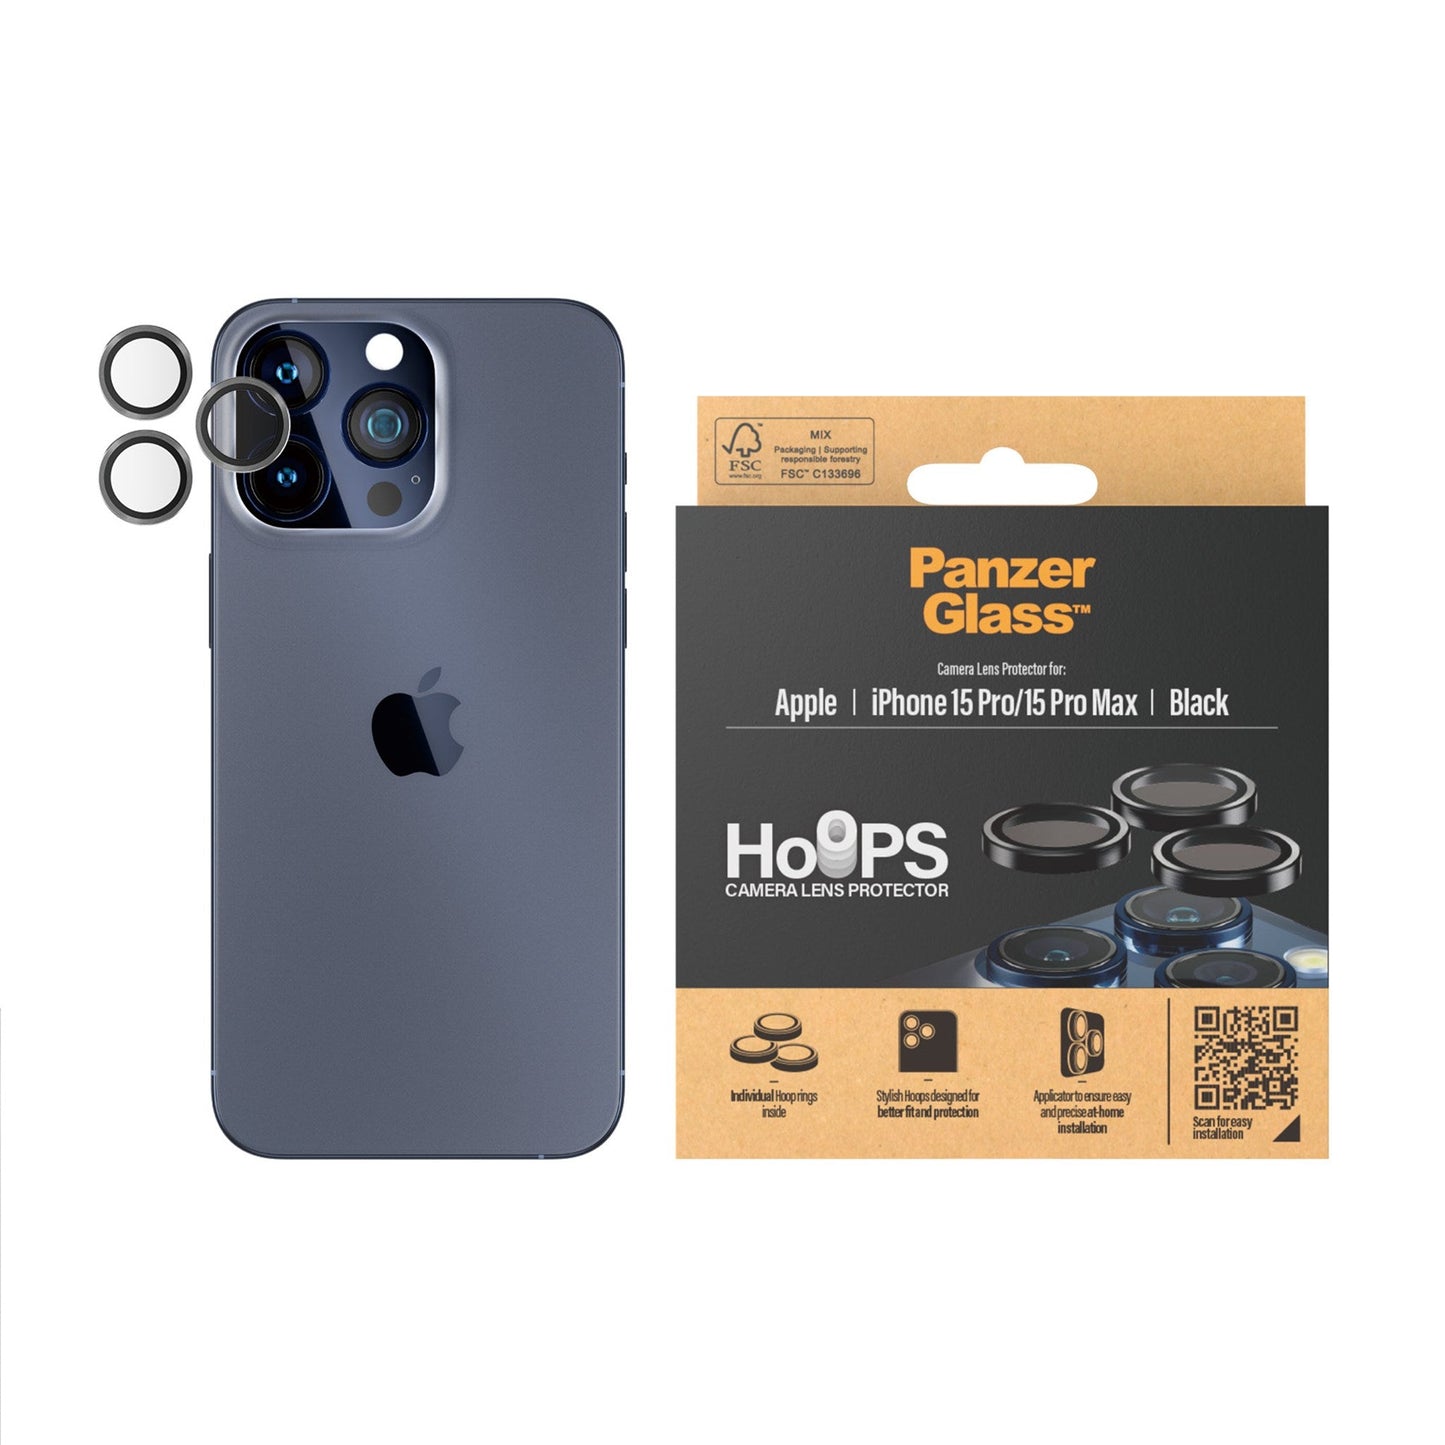 PanzerGlass Hoops Camera Lens Protector for Apple iPhone 15 Pro / Apple iPhone 15 Pro Max - Black